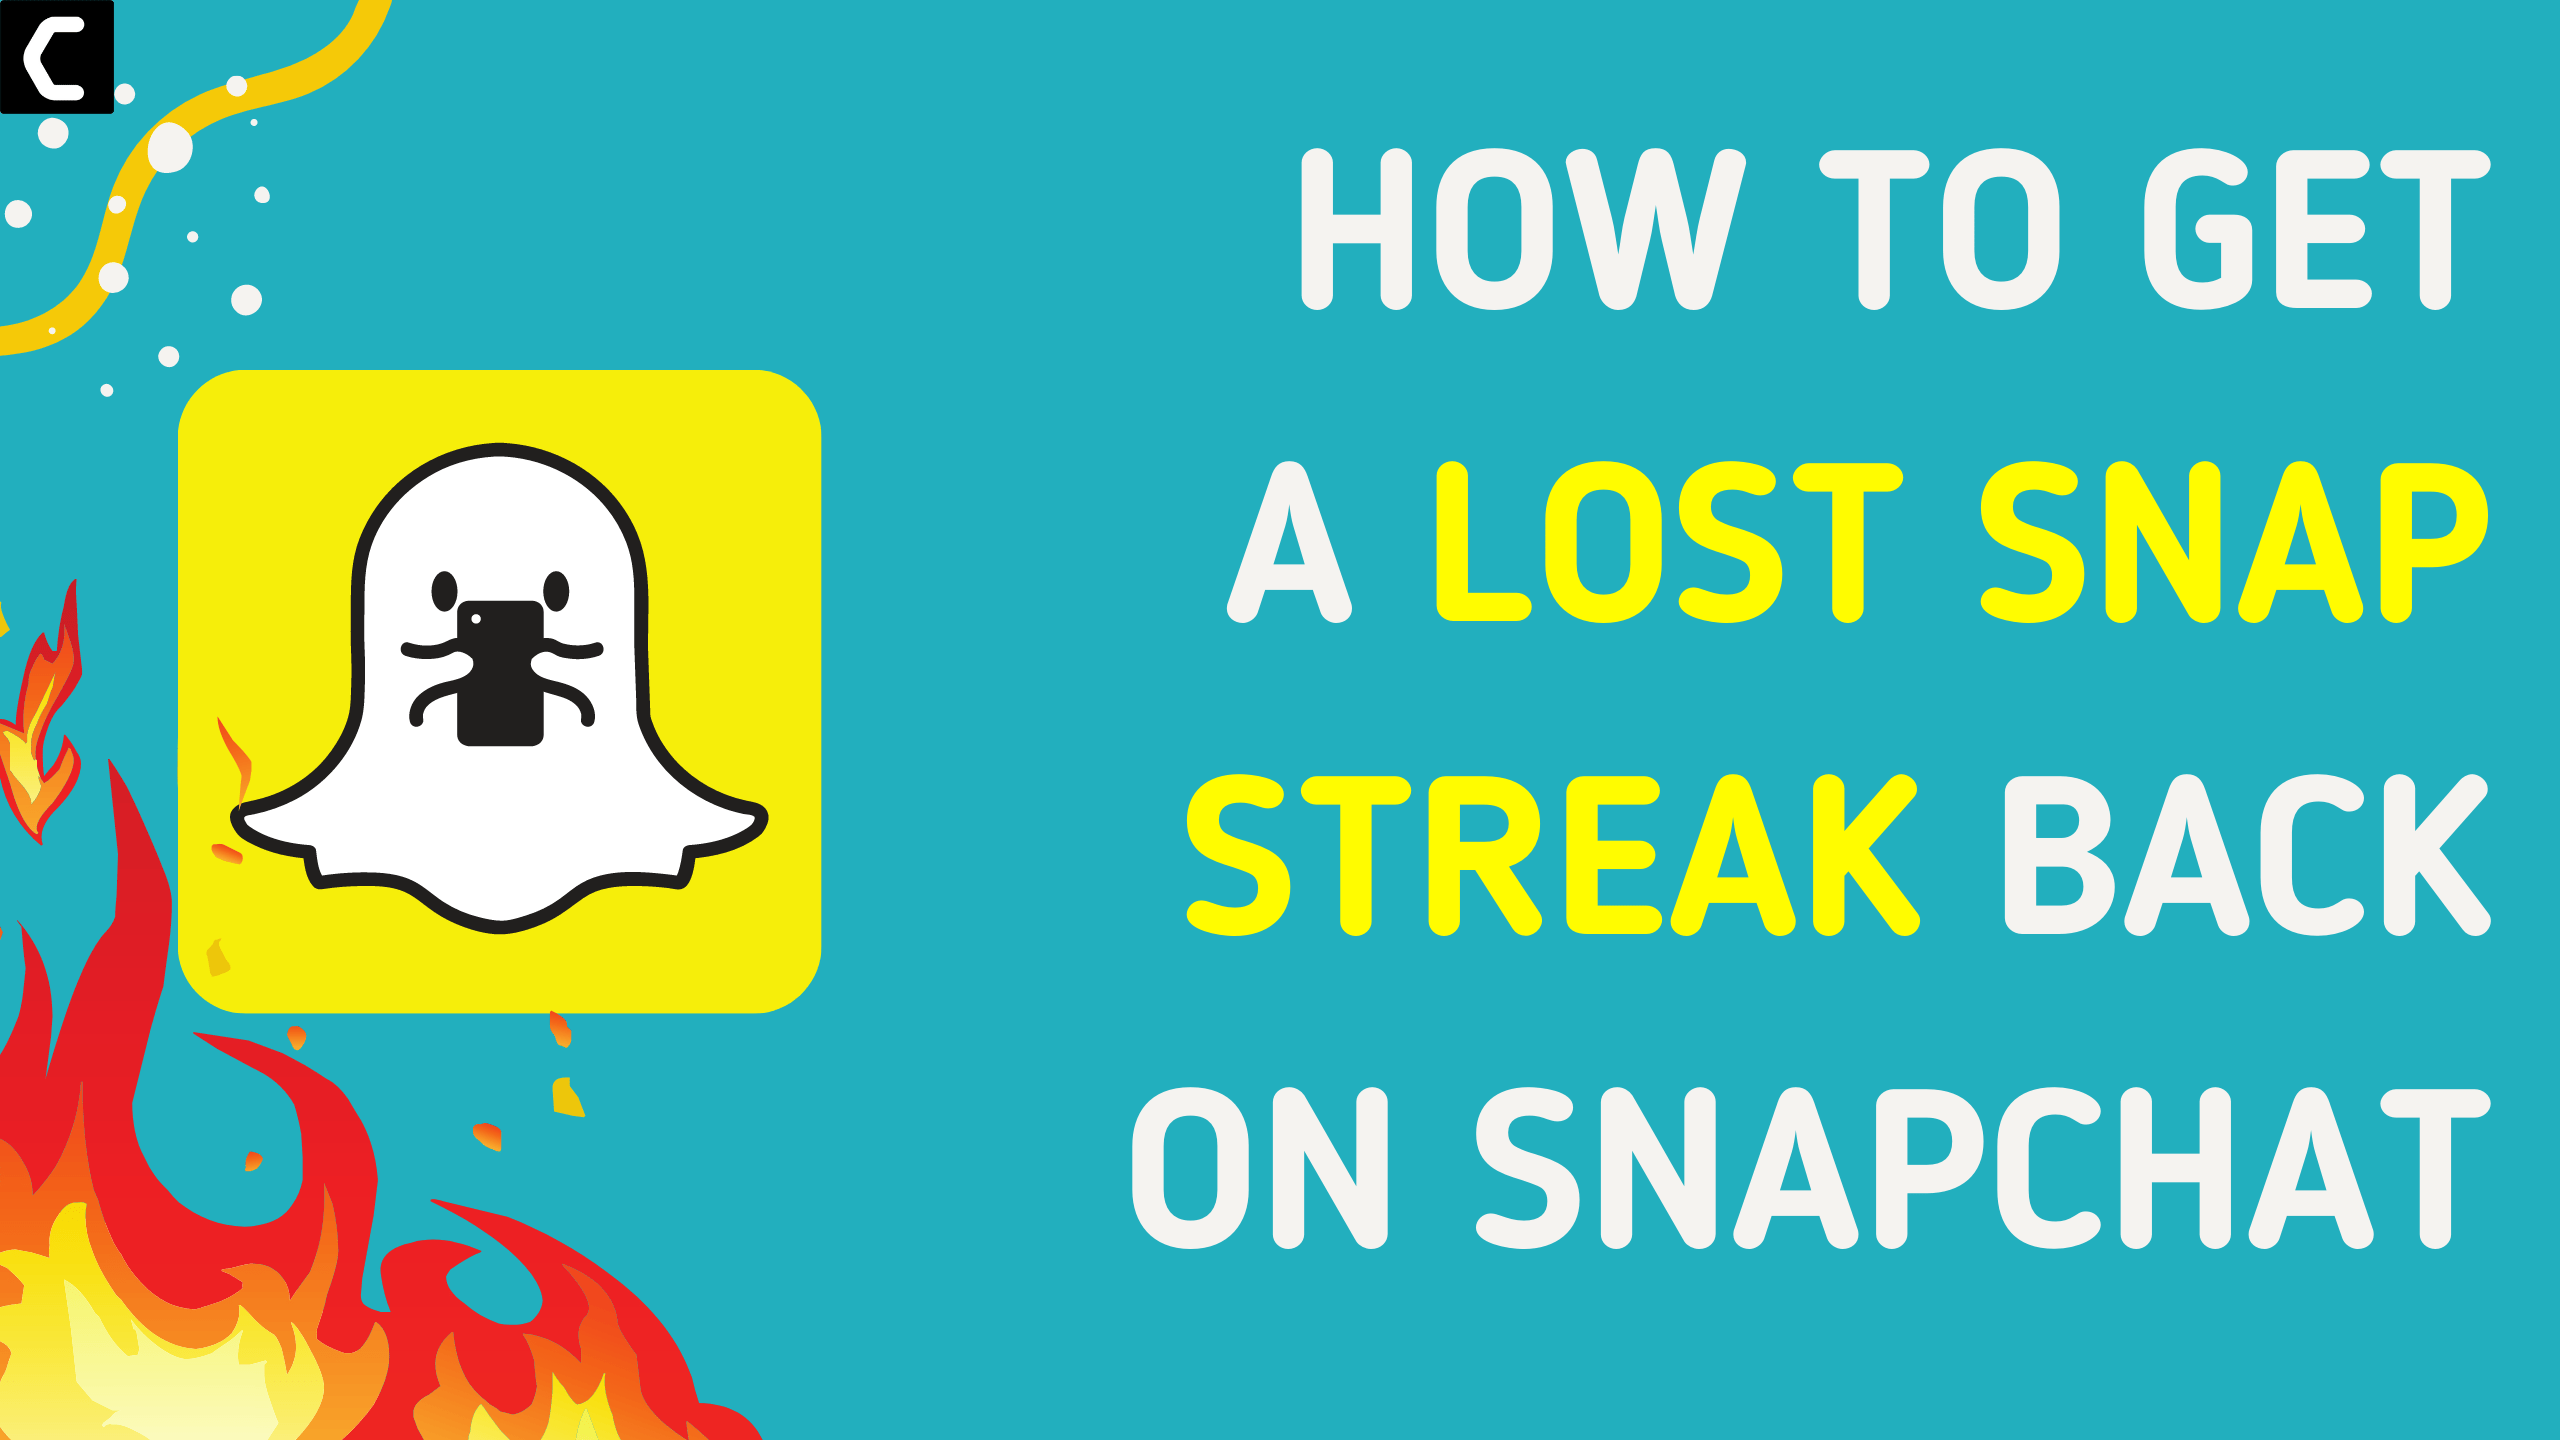 How to Get a Lost Snap Streak back on Snapchat